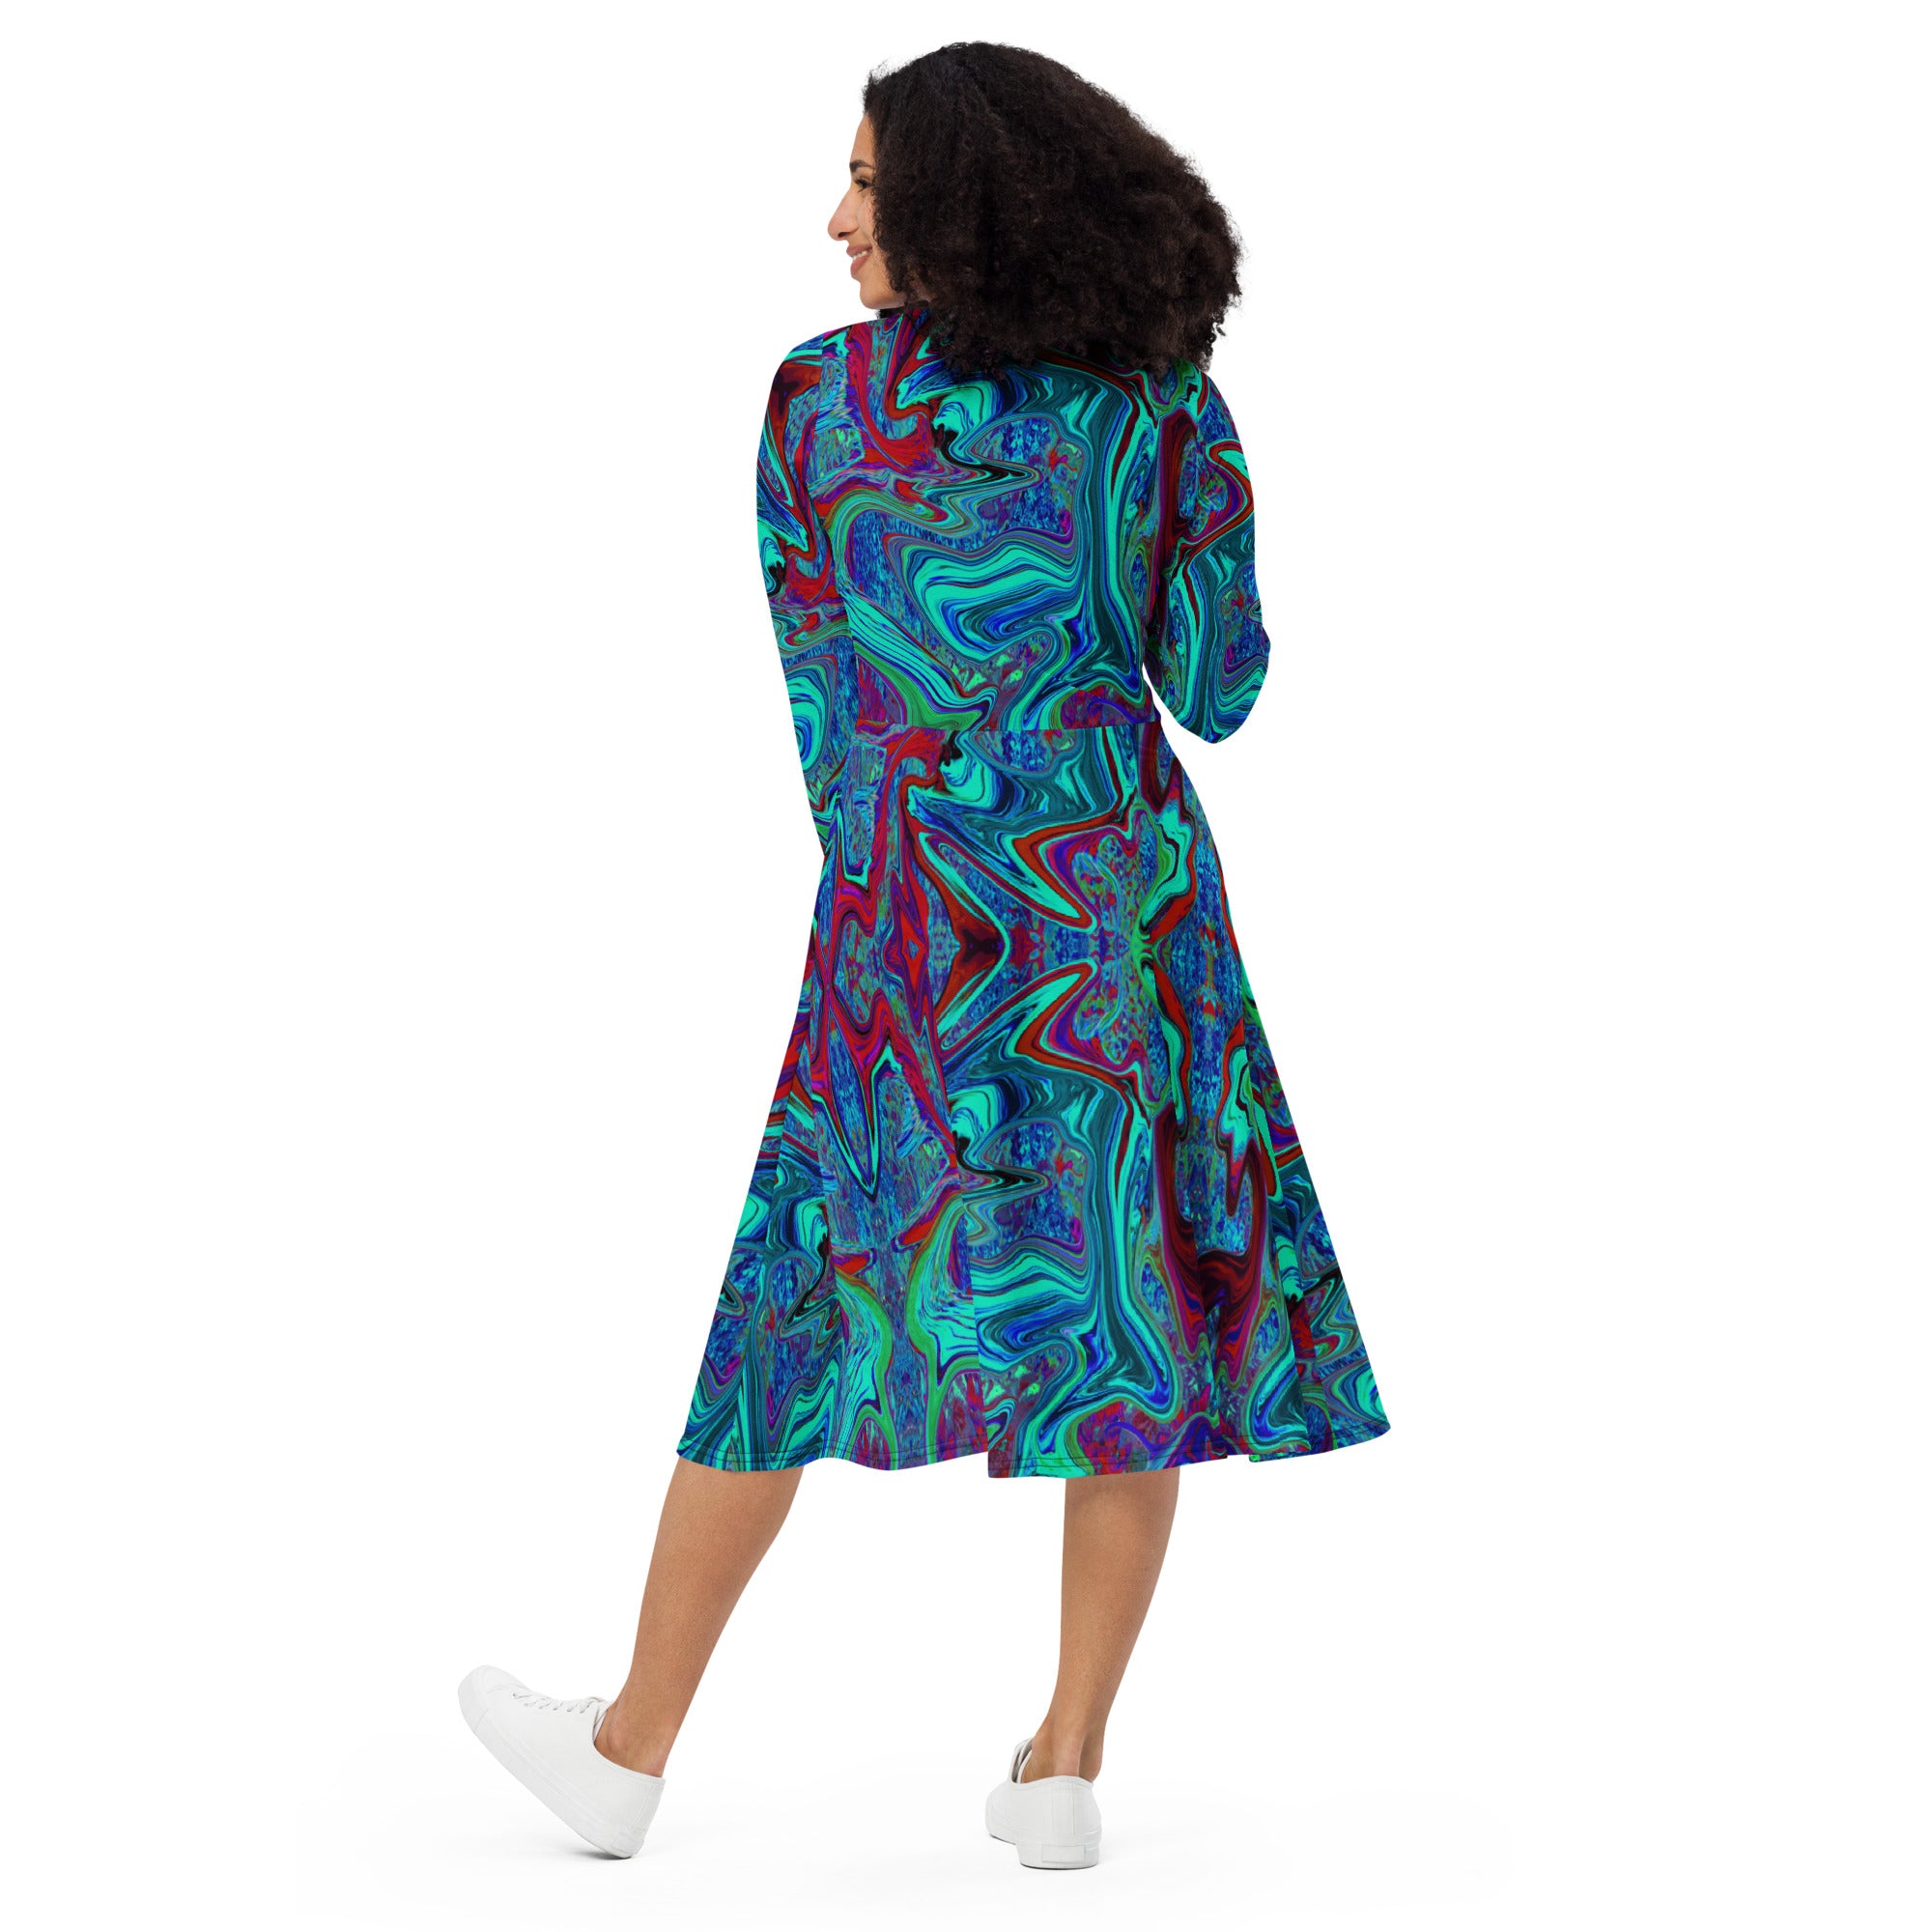 Midi Dress - Groovy Abstract Retro Art in Blue and Red